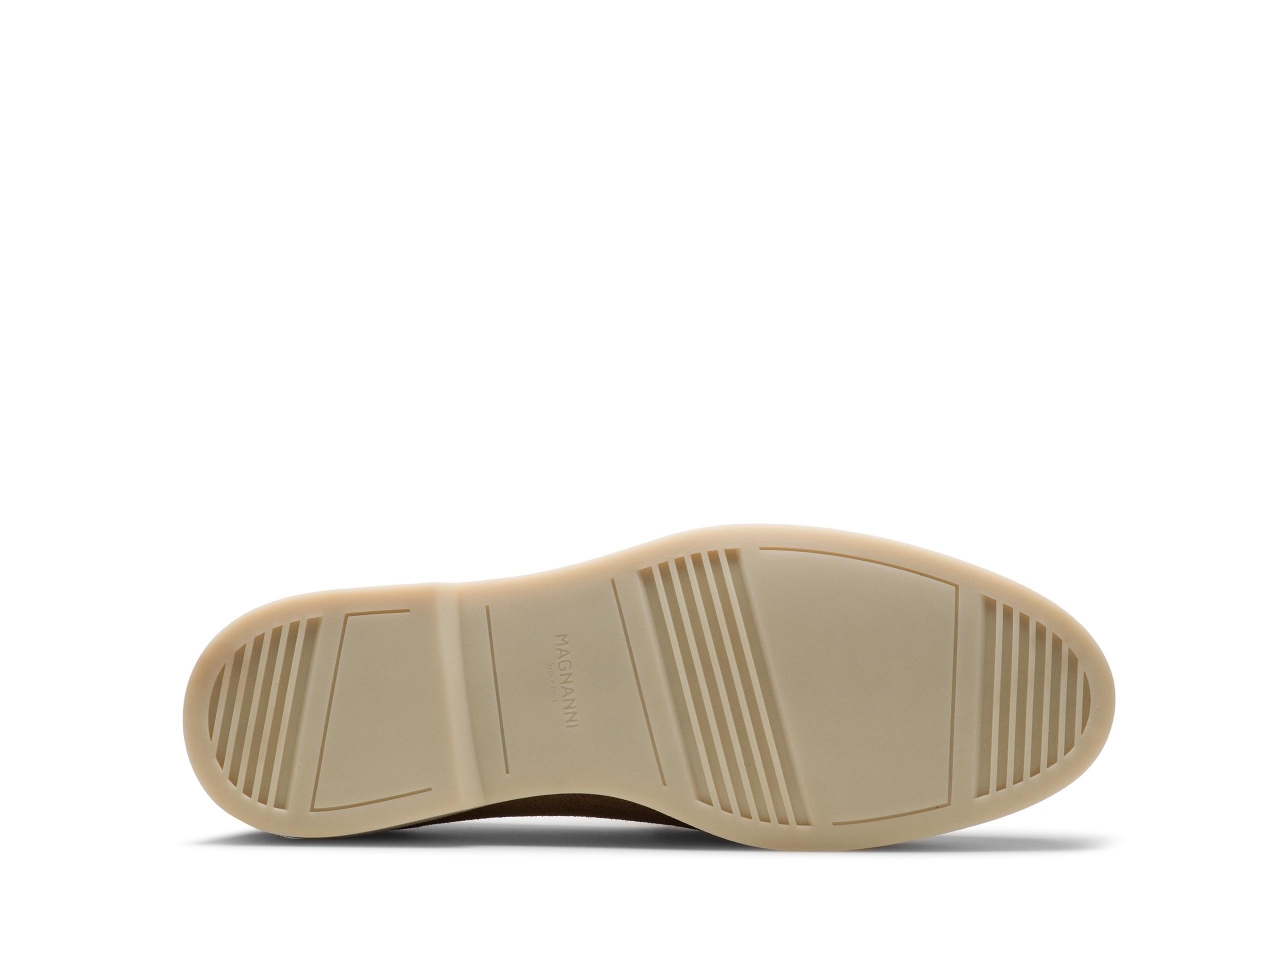 Sole of the Paraiso Taupe Suede